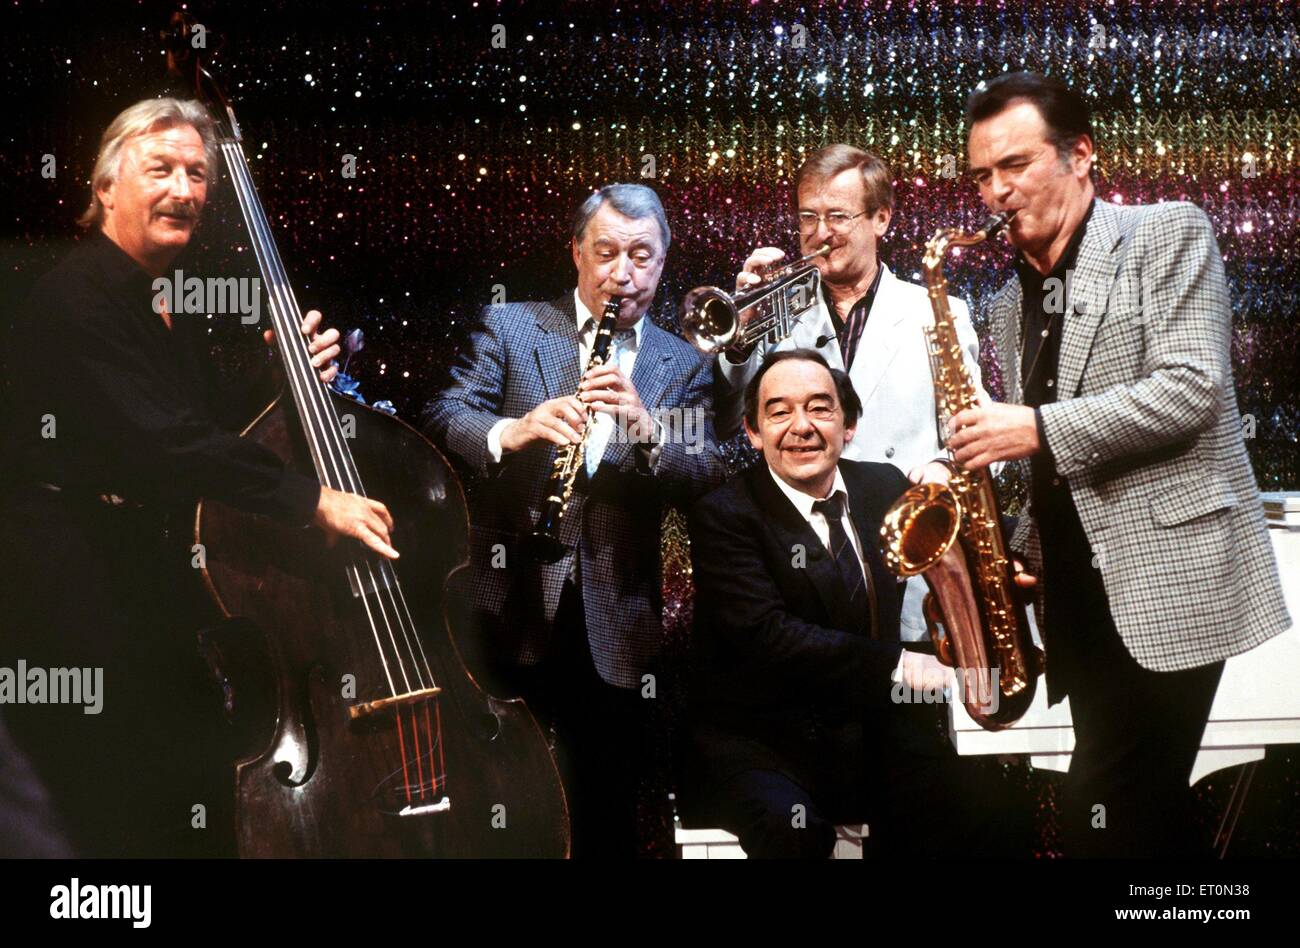 FILE - A file picture dated 04 March 1986 shows musicians (L-R) James Last, Hugo Strasser, Hazy Osterwald, Max Greger and Paul Kuhn (front) performing during a birthday show of German public broadcaster ZDF entitled 'Hallo Max' in Muencheberg, Germany. German band leader and composer James Last has died at the age of 86 in Florida, USA, on 09 June 2015, his long-time concert organiser Semmel Concerts said on 10 June 2015. Photo: Istvan Bajzat/dpa Stock Photo